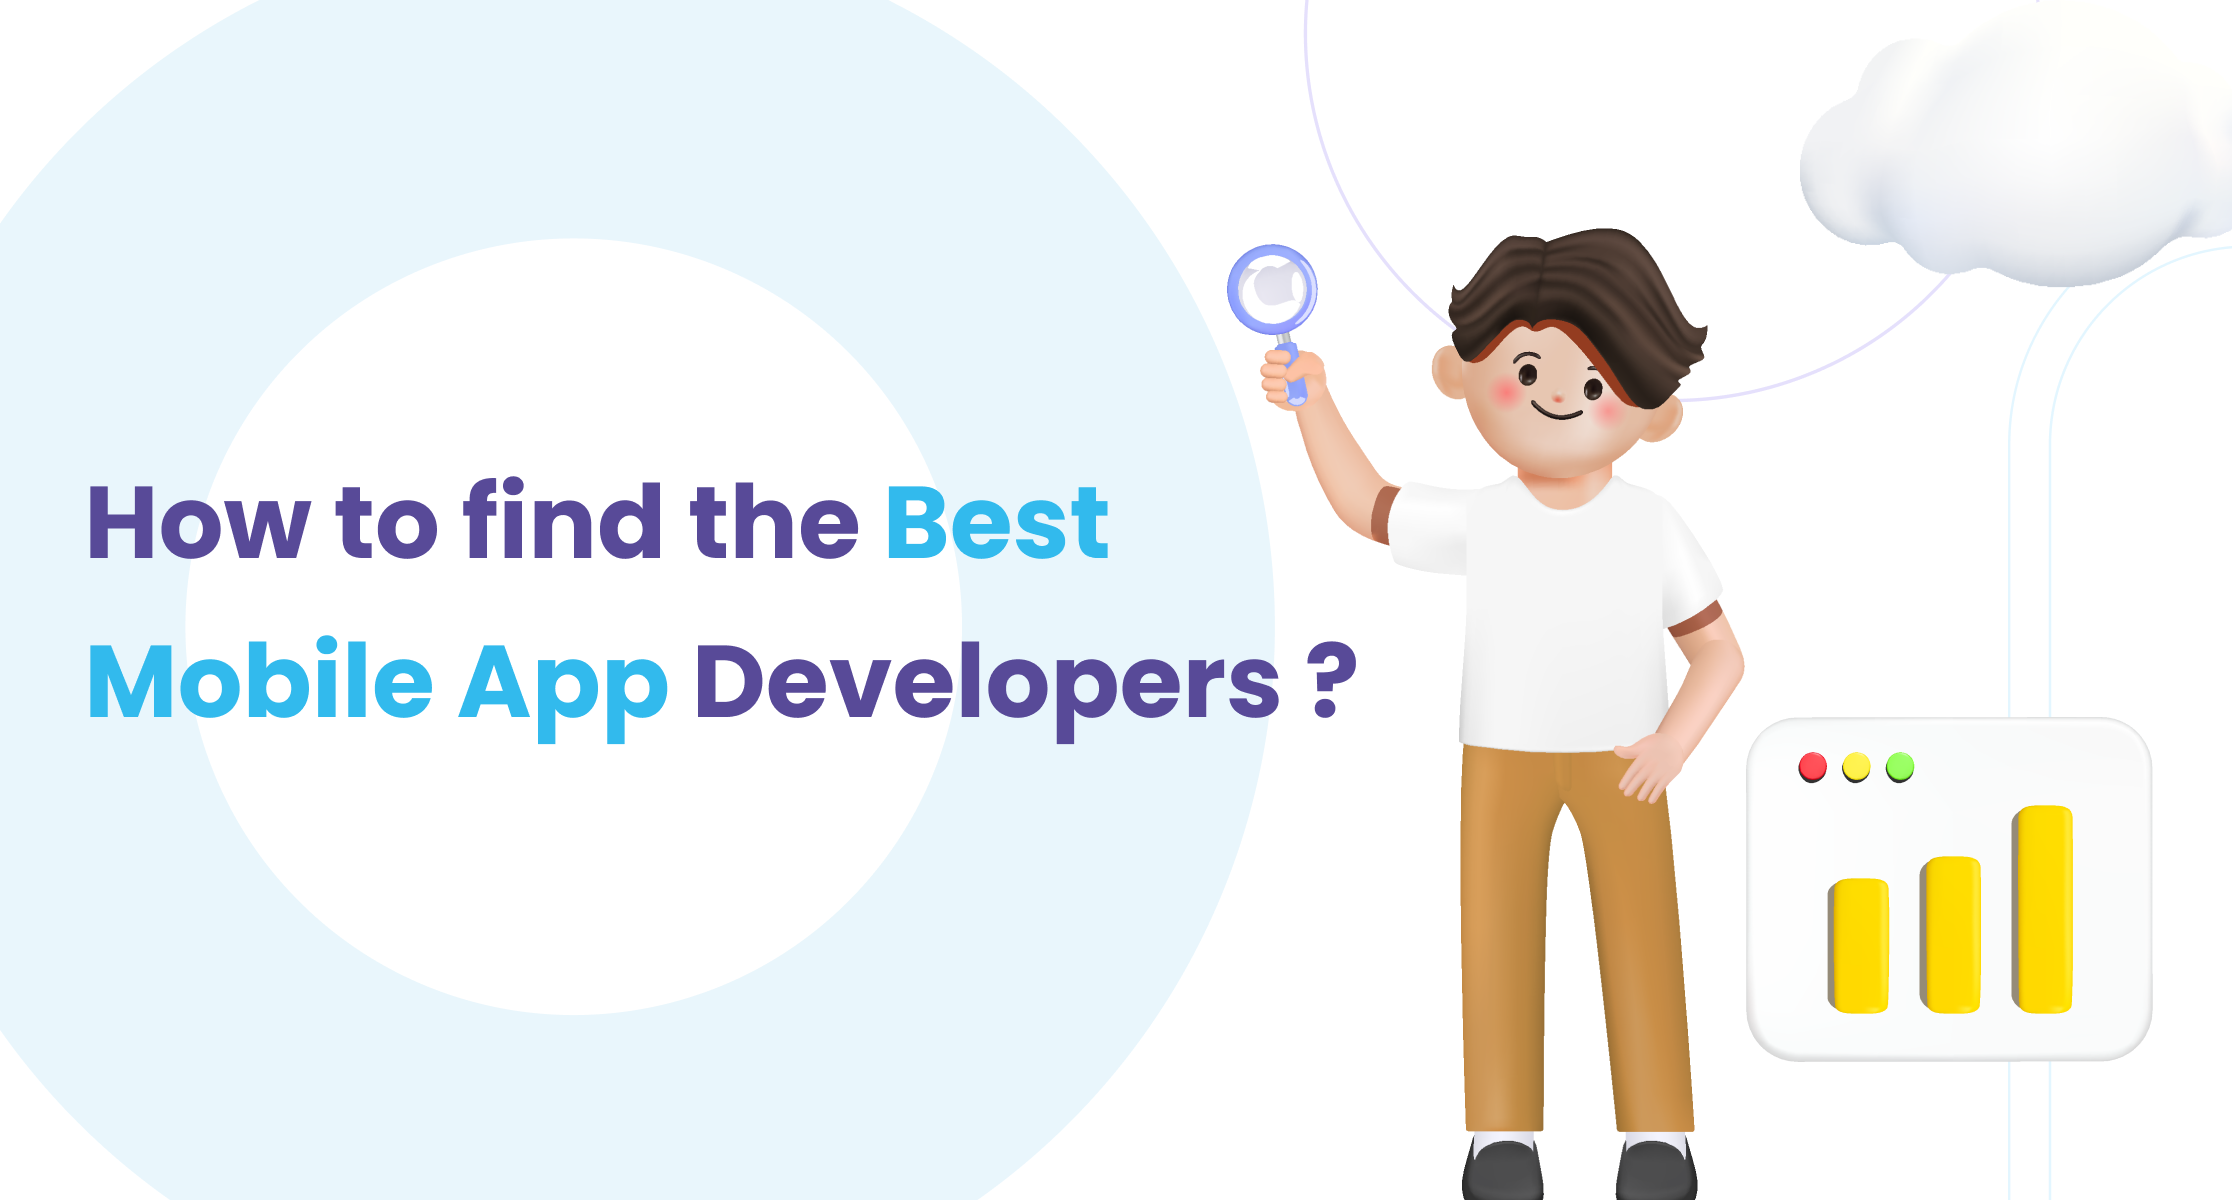 How to Find the Best Mobile App Developers